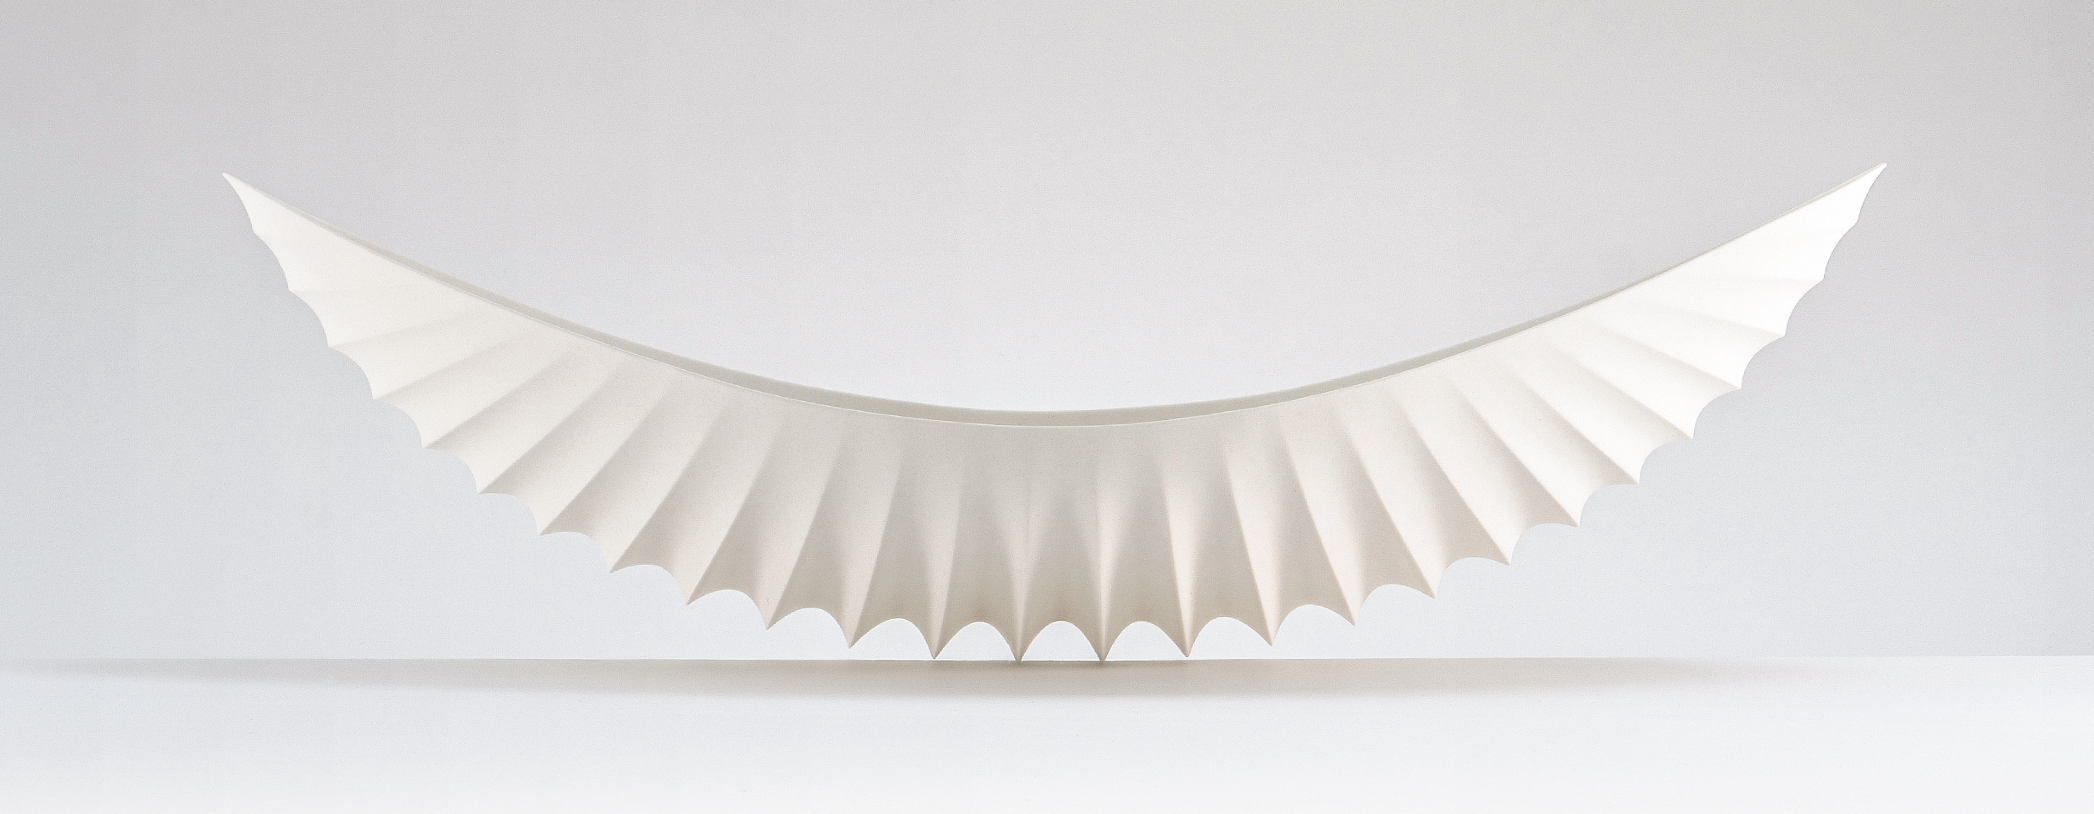 8 Mark Goudy’s Shell Series Object #1229, 19 in. (48 cm) in length, translucent porcelain, fired to cone 5 in oxidation, 2021.